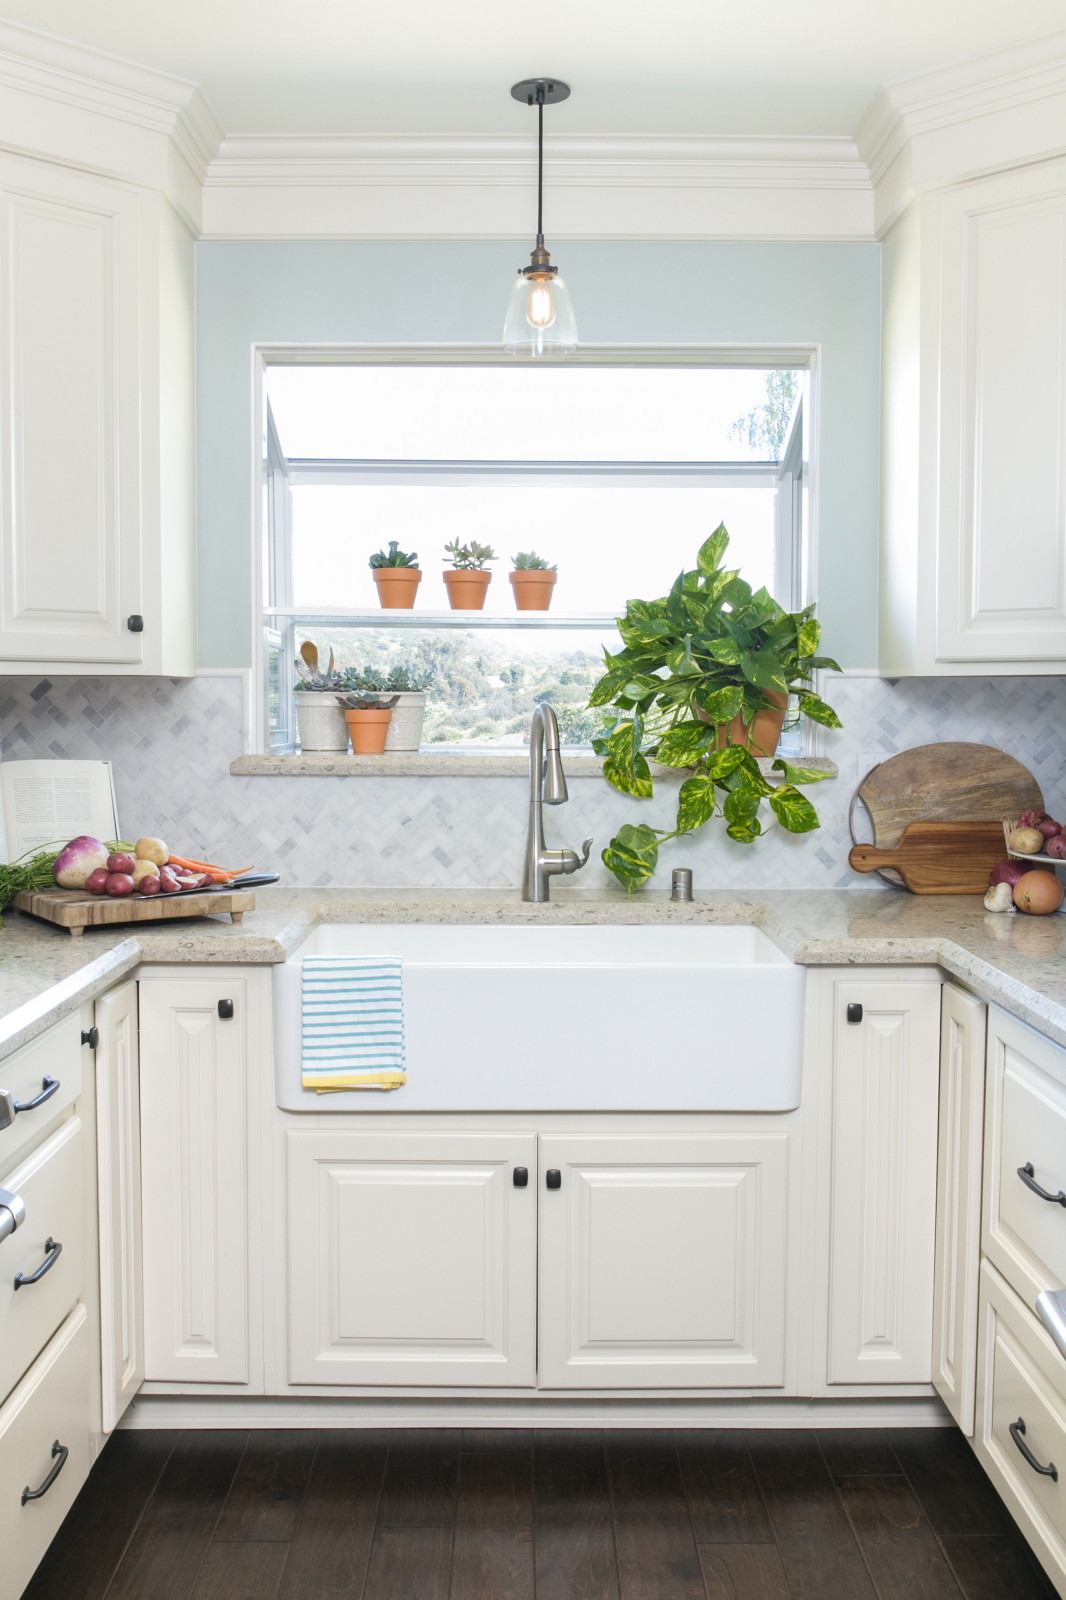 The Garden Window Over Sink Allow More Natural Light To Brighten The Small U Shaped Kitchen 